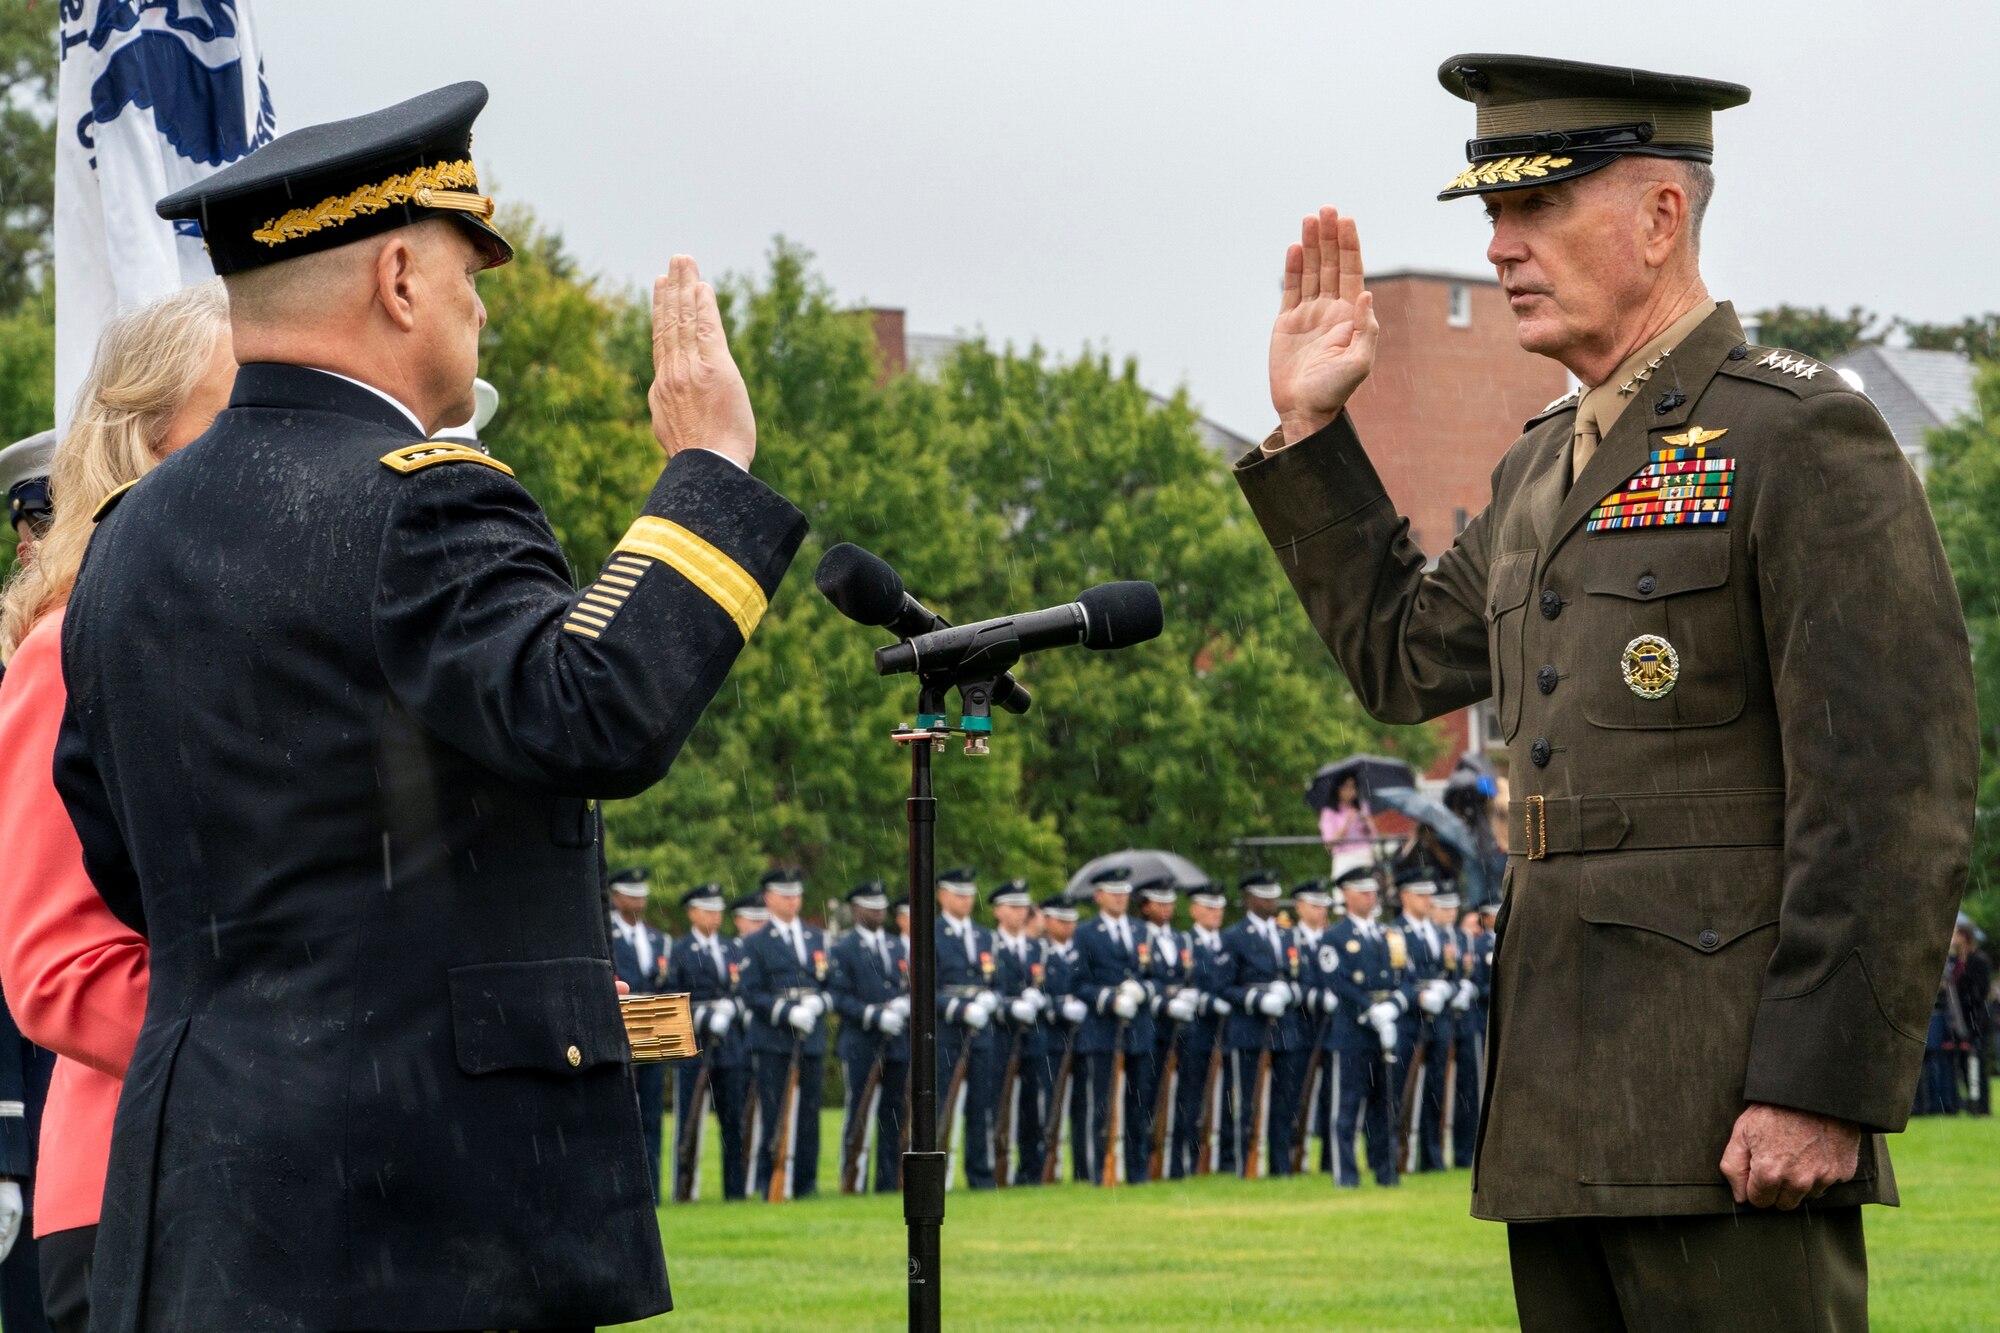 Marine Corps Gen. Joe Dunford, the outgoing chairman of the Joint Chiefs of Staff, swears in his successor, Army Gen. Mark A. Milley, during an armed forces welcome ceremony at Joint Base Myer-Henderson Hall, Virginia, Sept. 30, 2019.